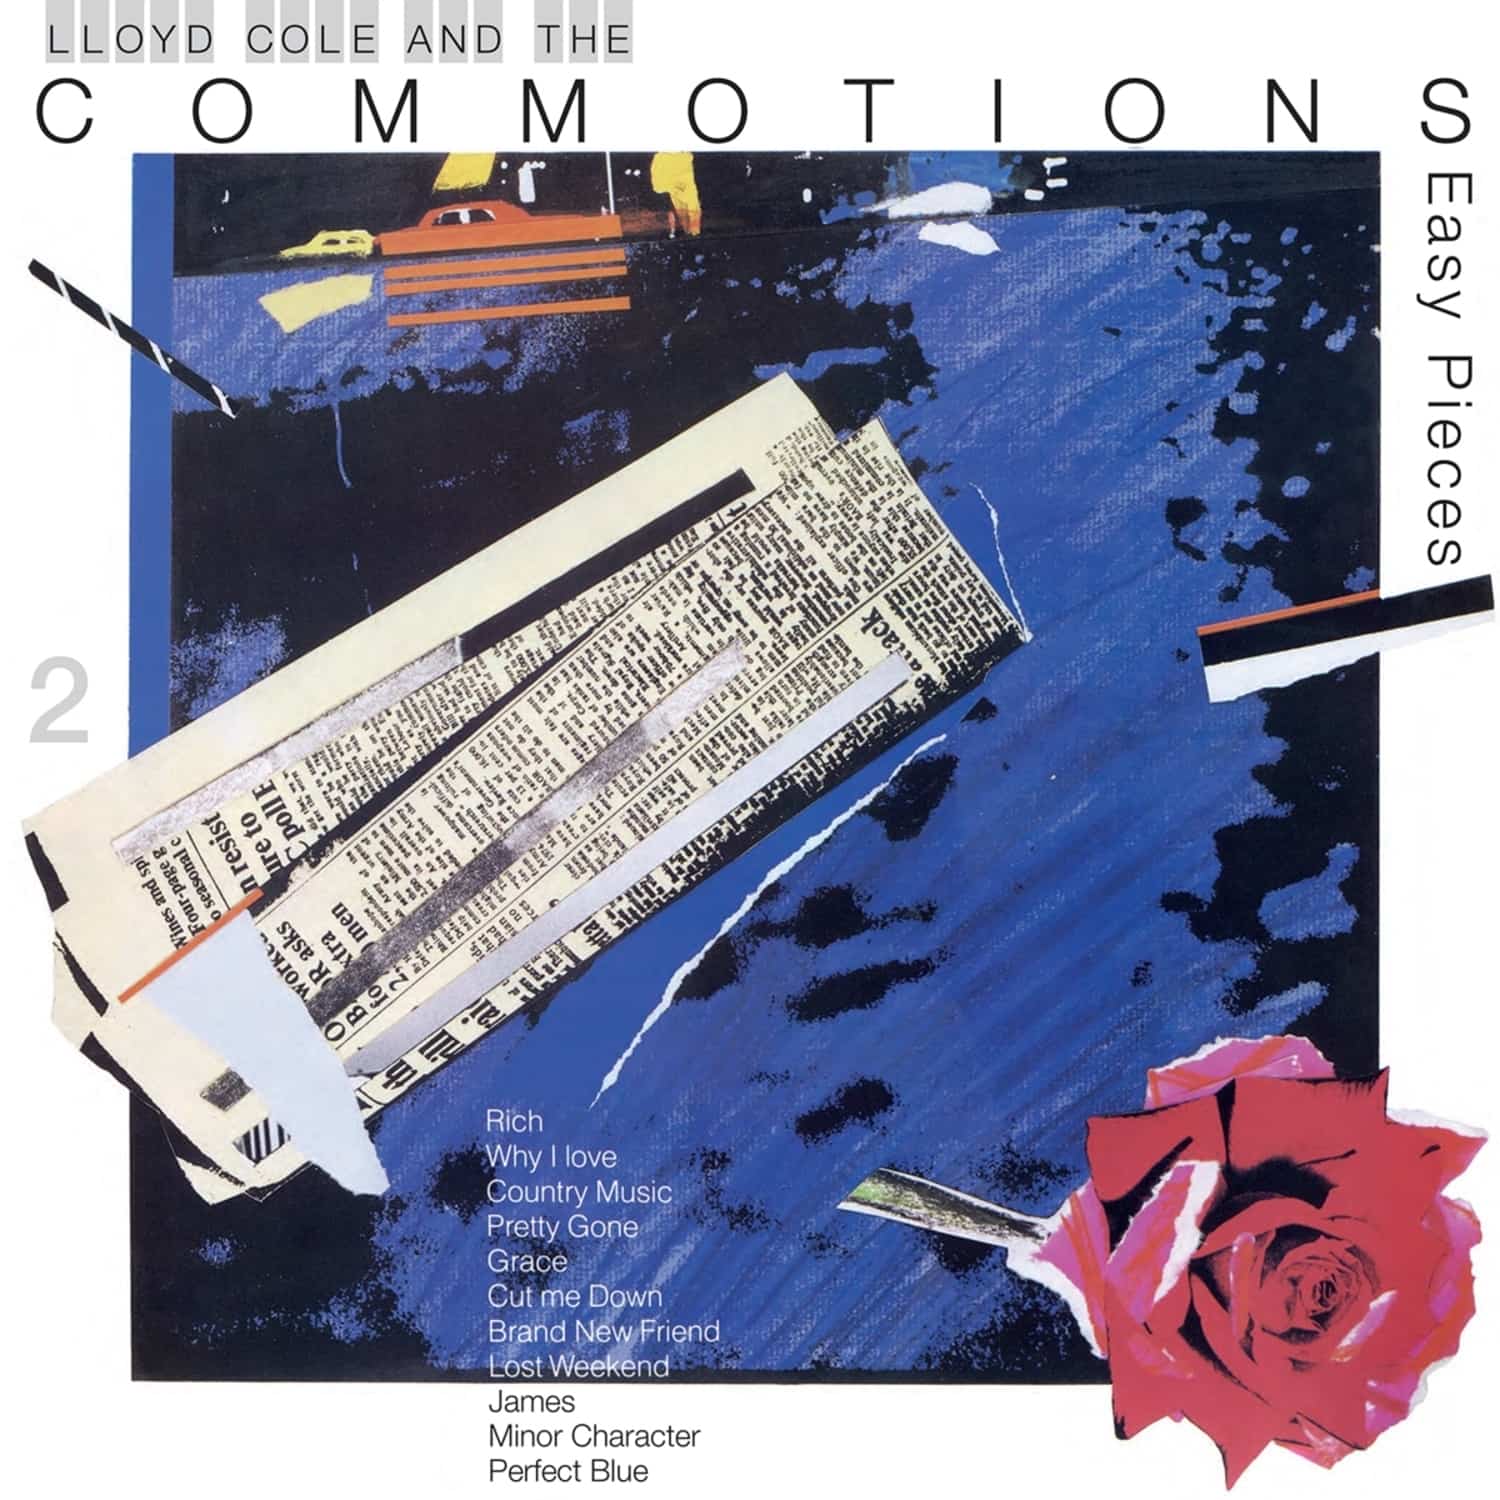  Lloyd Cole & Commotions - EASY PIECES 